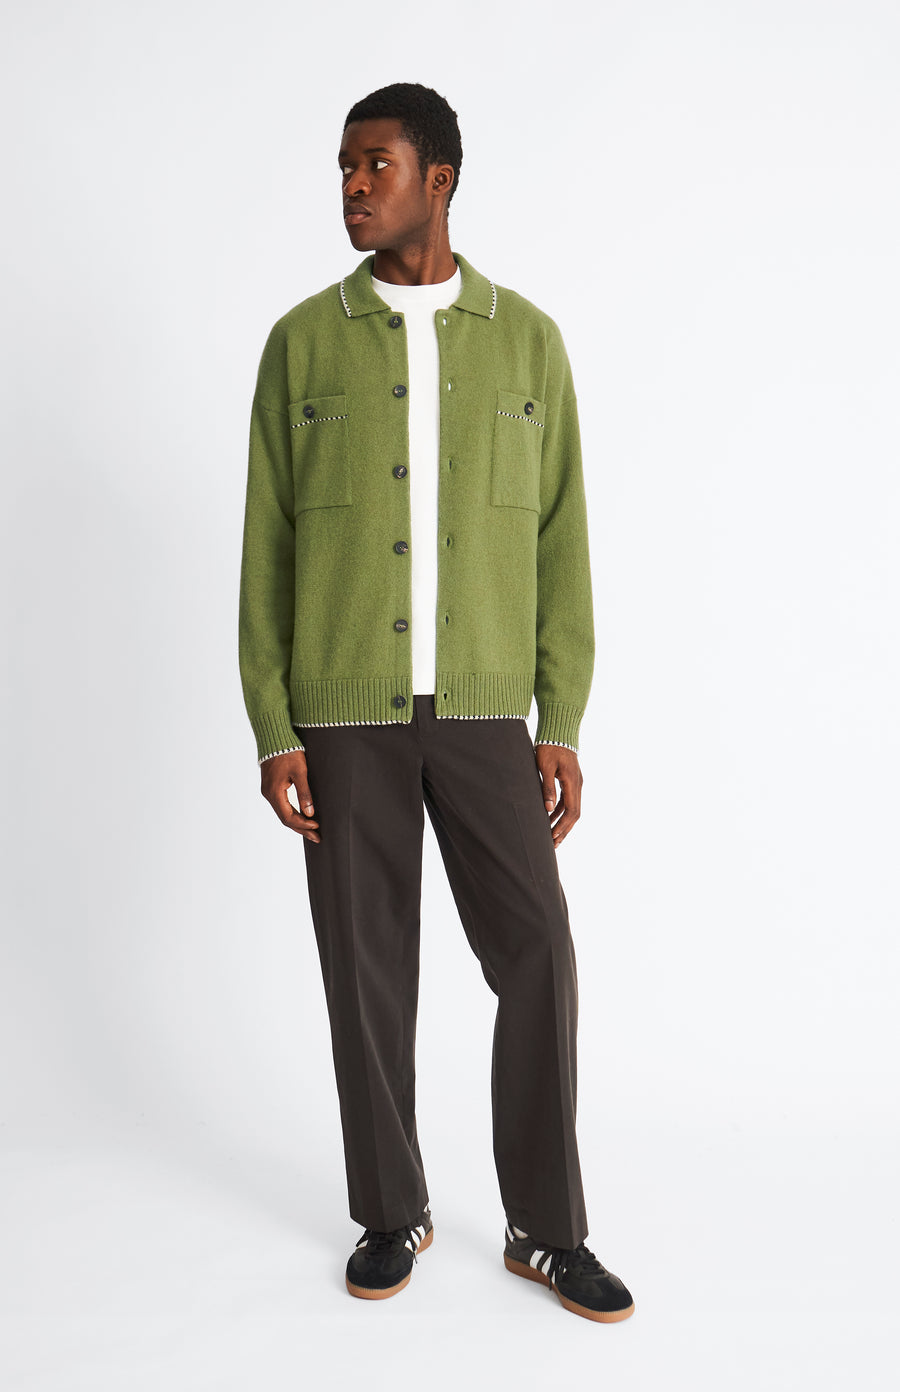 Pringle of Scotland Knitted lambswool overshirt in mineral green with contrast edging unbuttoned